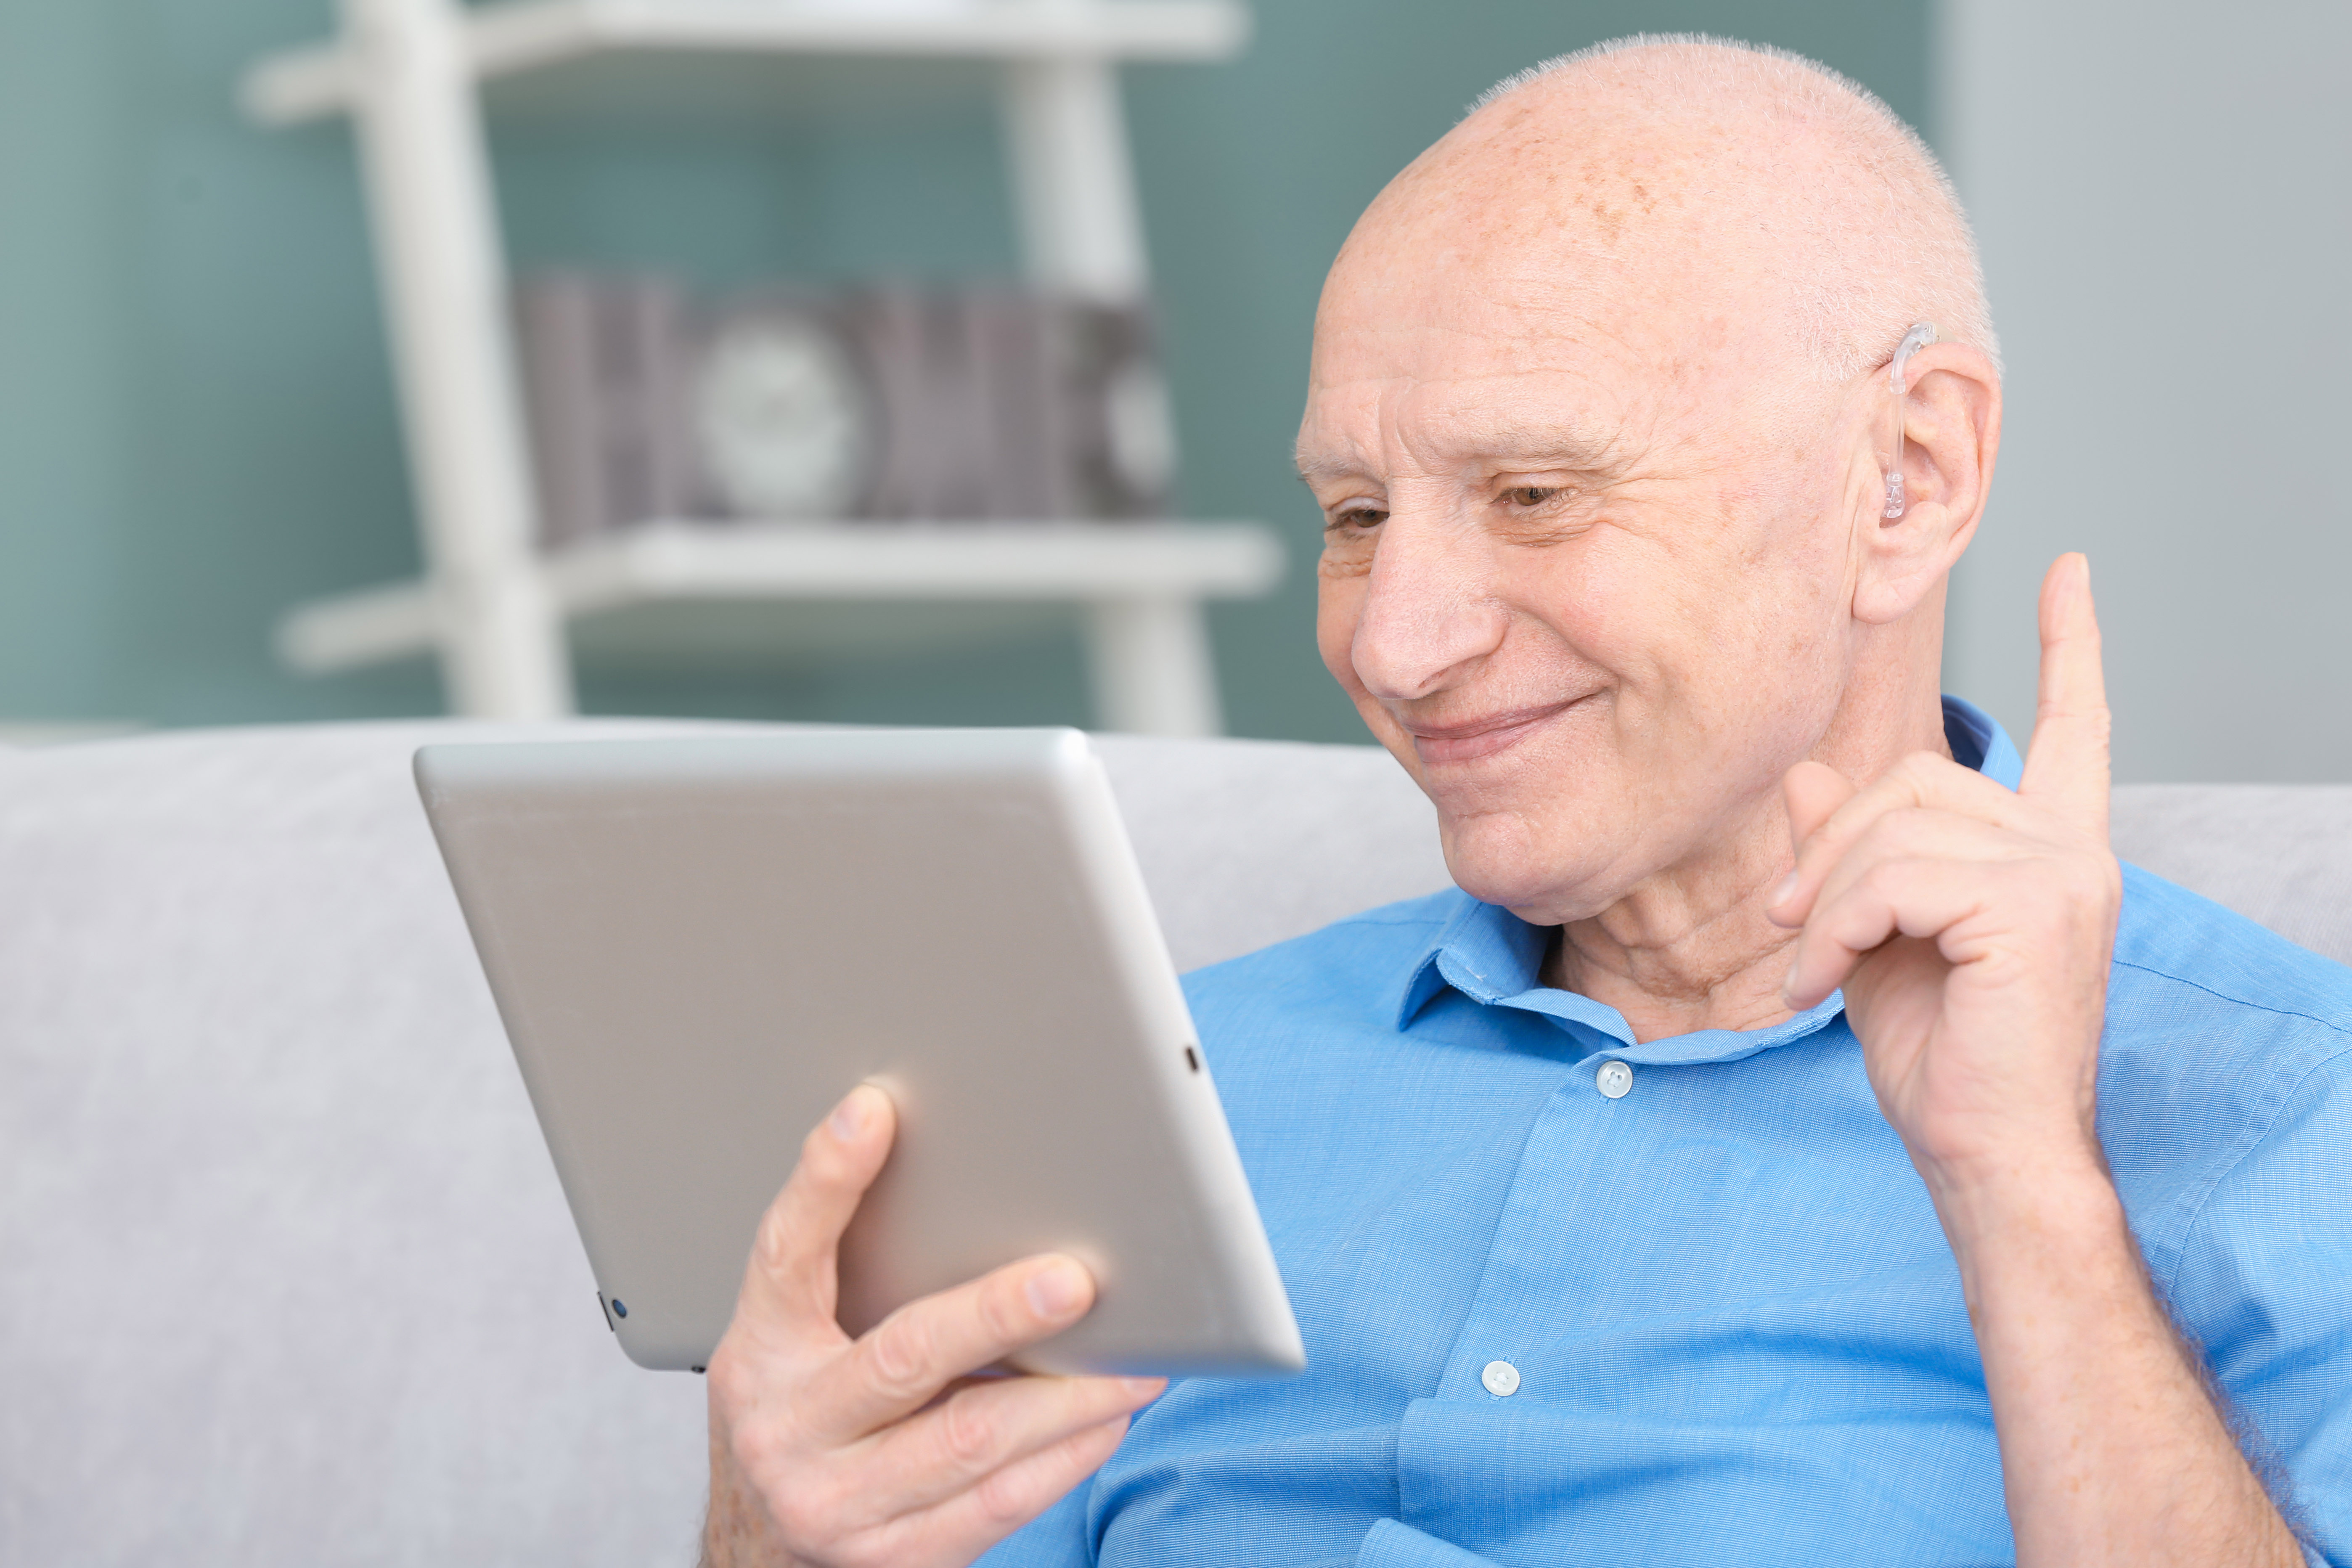 "A older man with short white hair smiles and gestures with his index finger raised to indicate he understands while viewing an electronic tablet in his other hand"